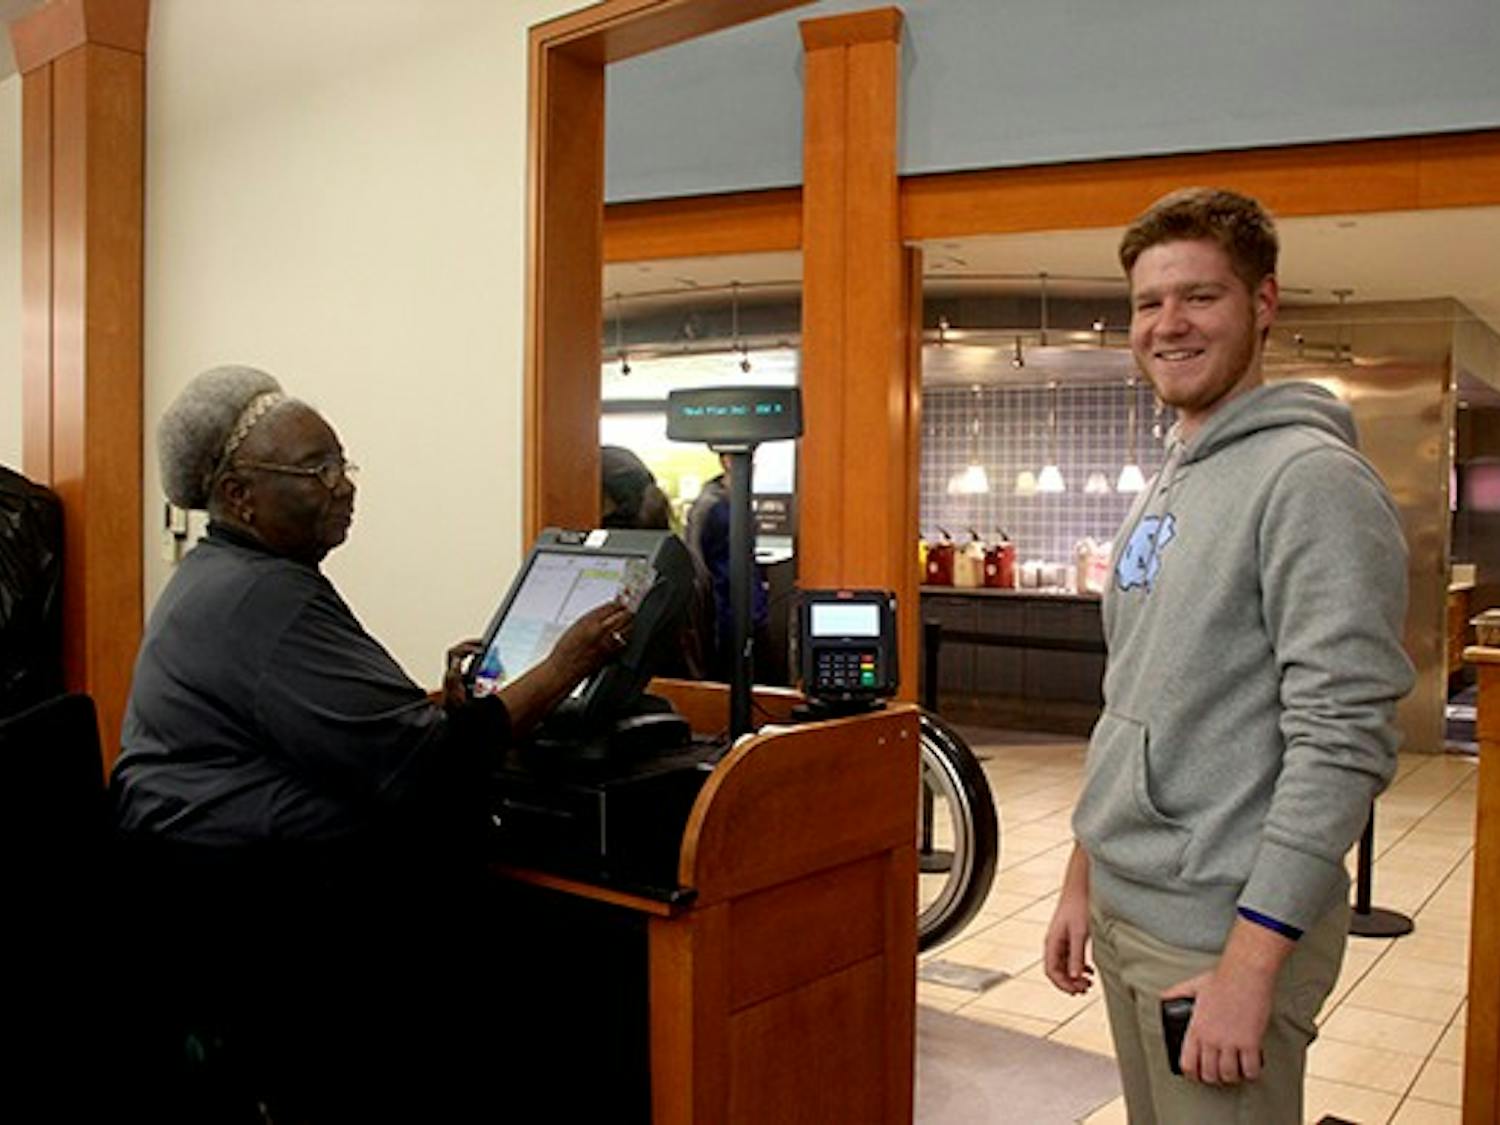 Matthew Watts, a Junior major in economics and geography, is using the new CDS plus swipe system in Lenoir dinning hall. 